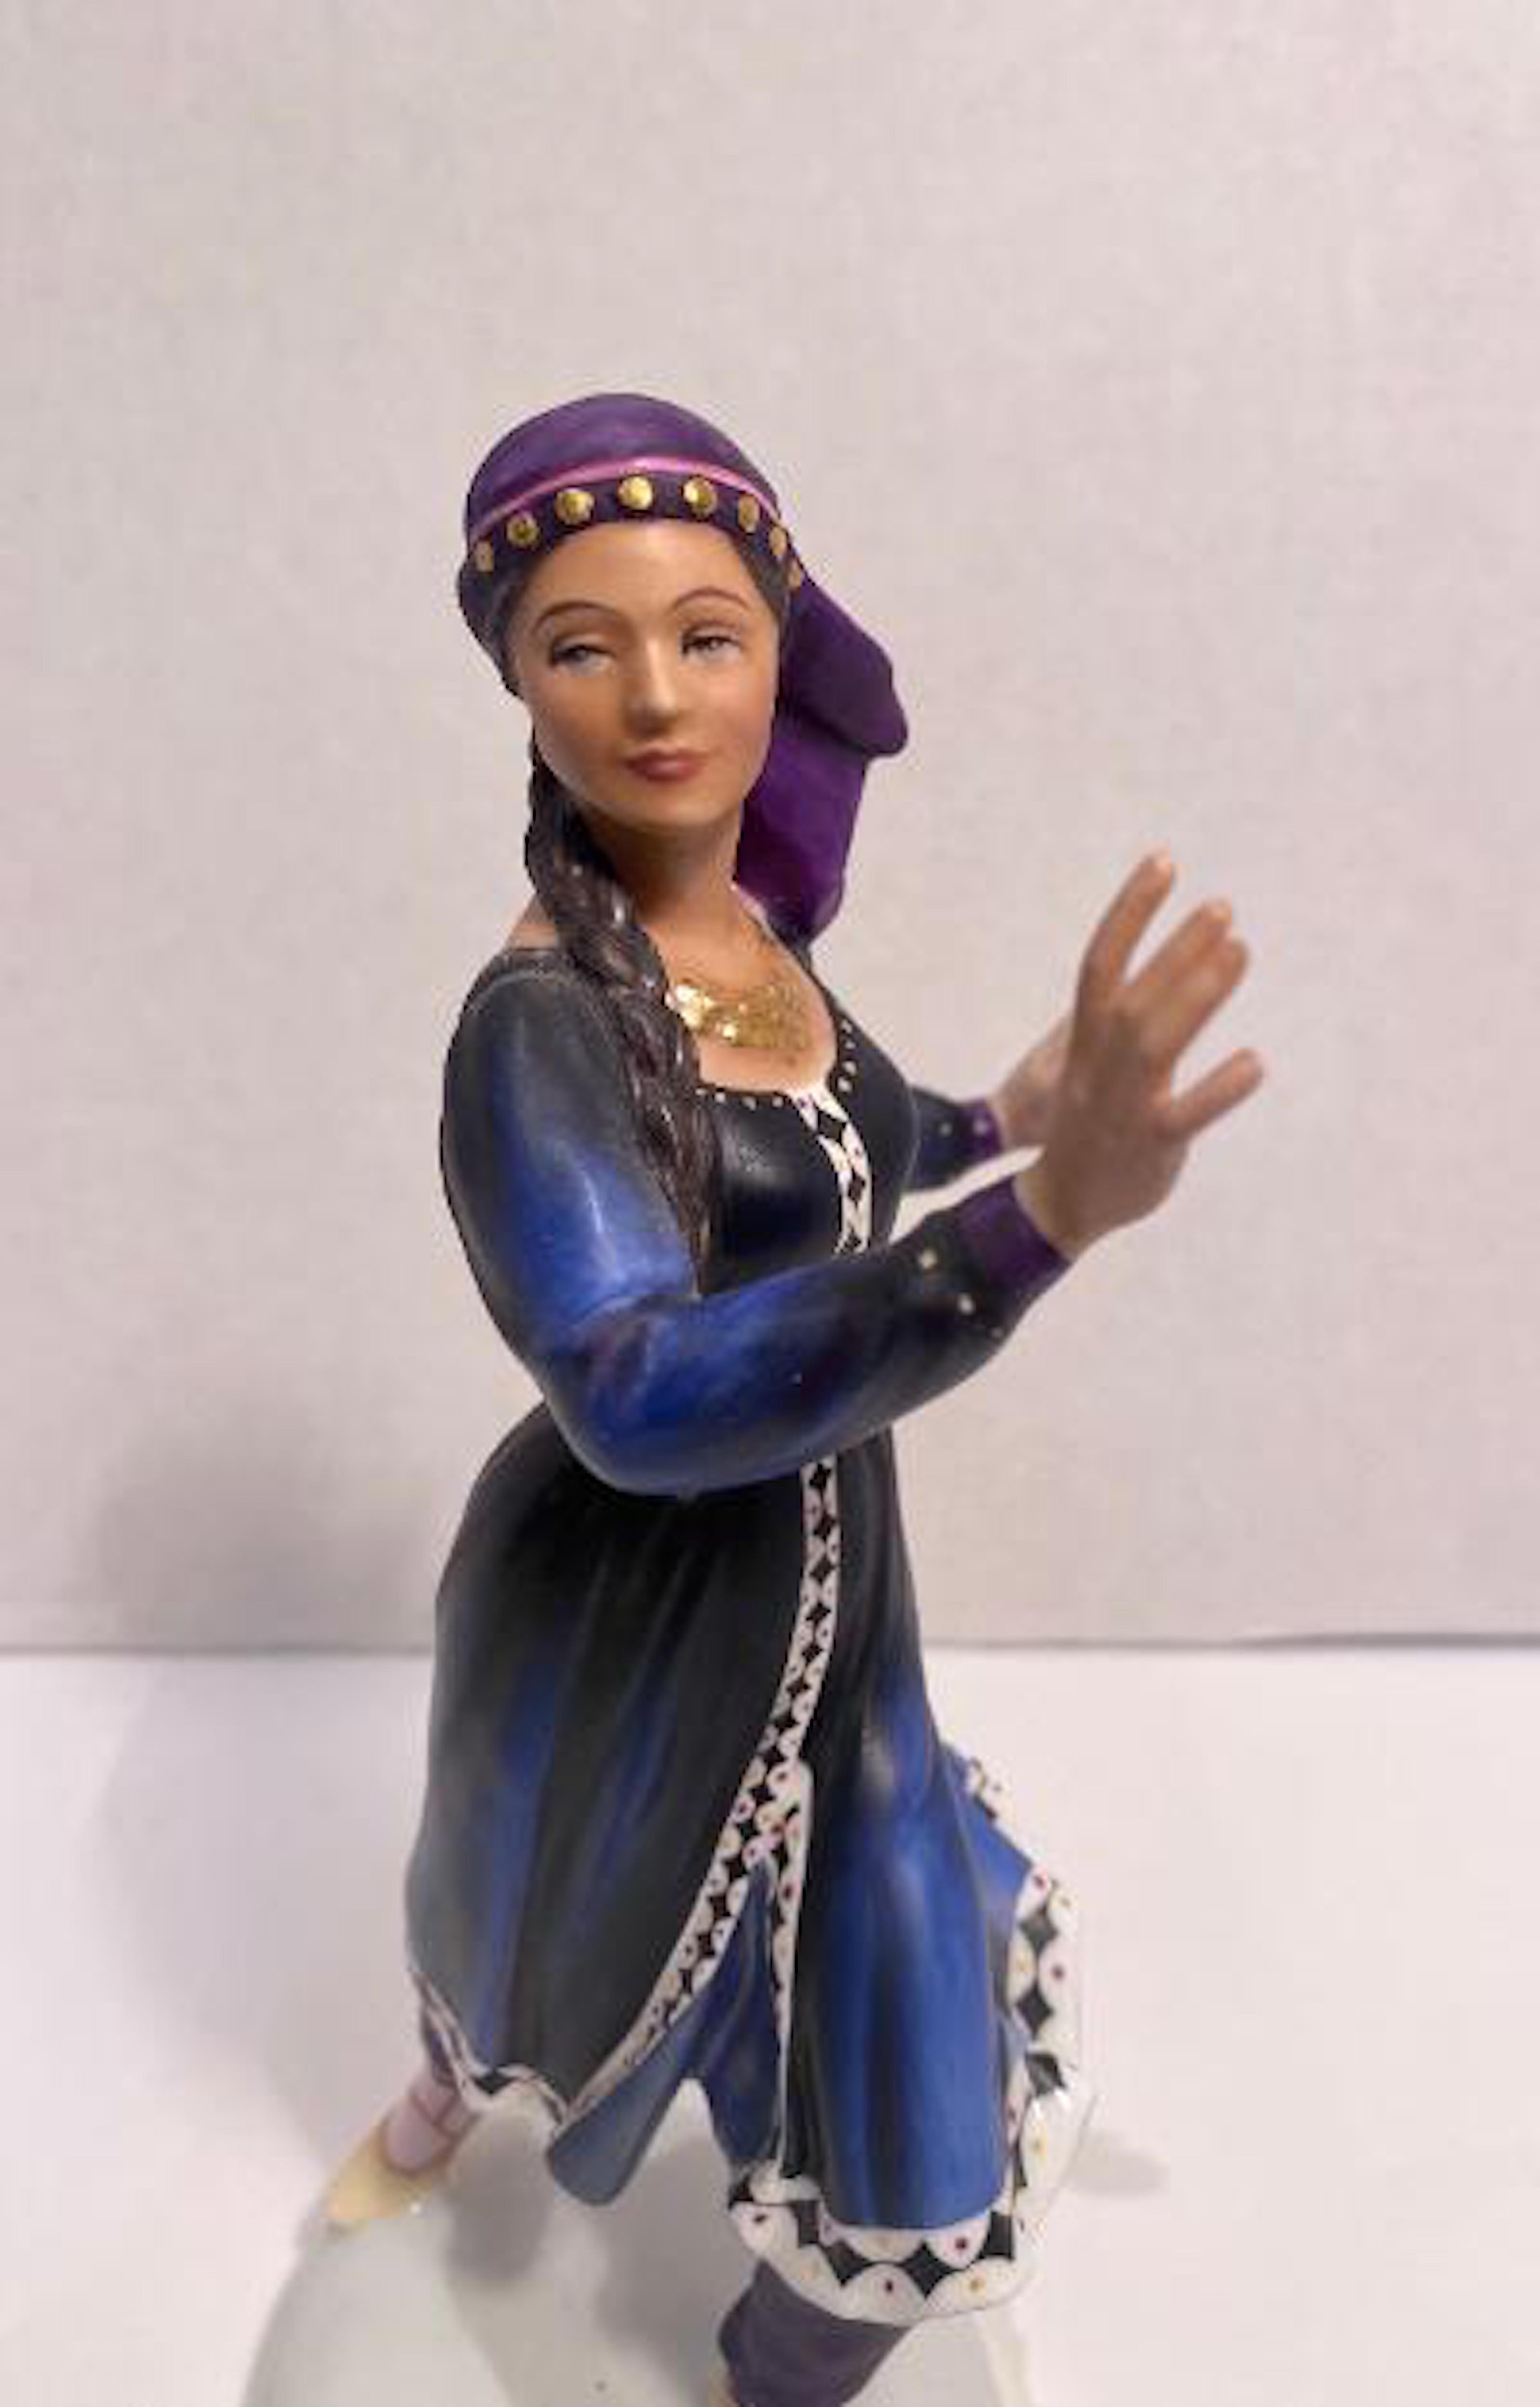 Very collectible, limited edition of only 750 pieces in the world, Royal Doulton “Dancers of the World Kurdish Dancer” fine porcelain figurine in a matte finish from the Dancers of the World Series. Royal Doulton Number HN 2867. Designed by Peggy